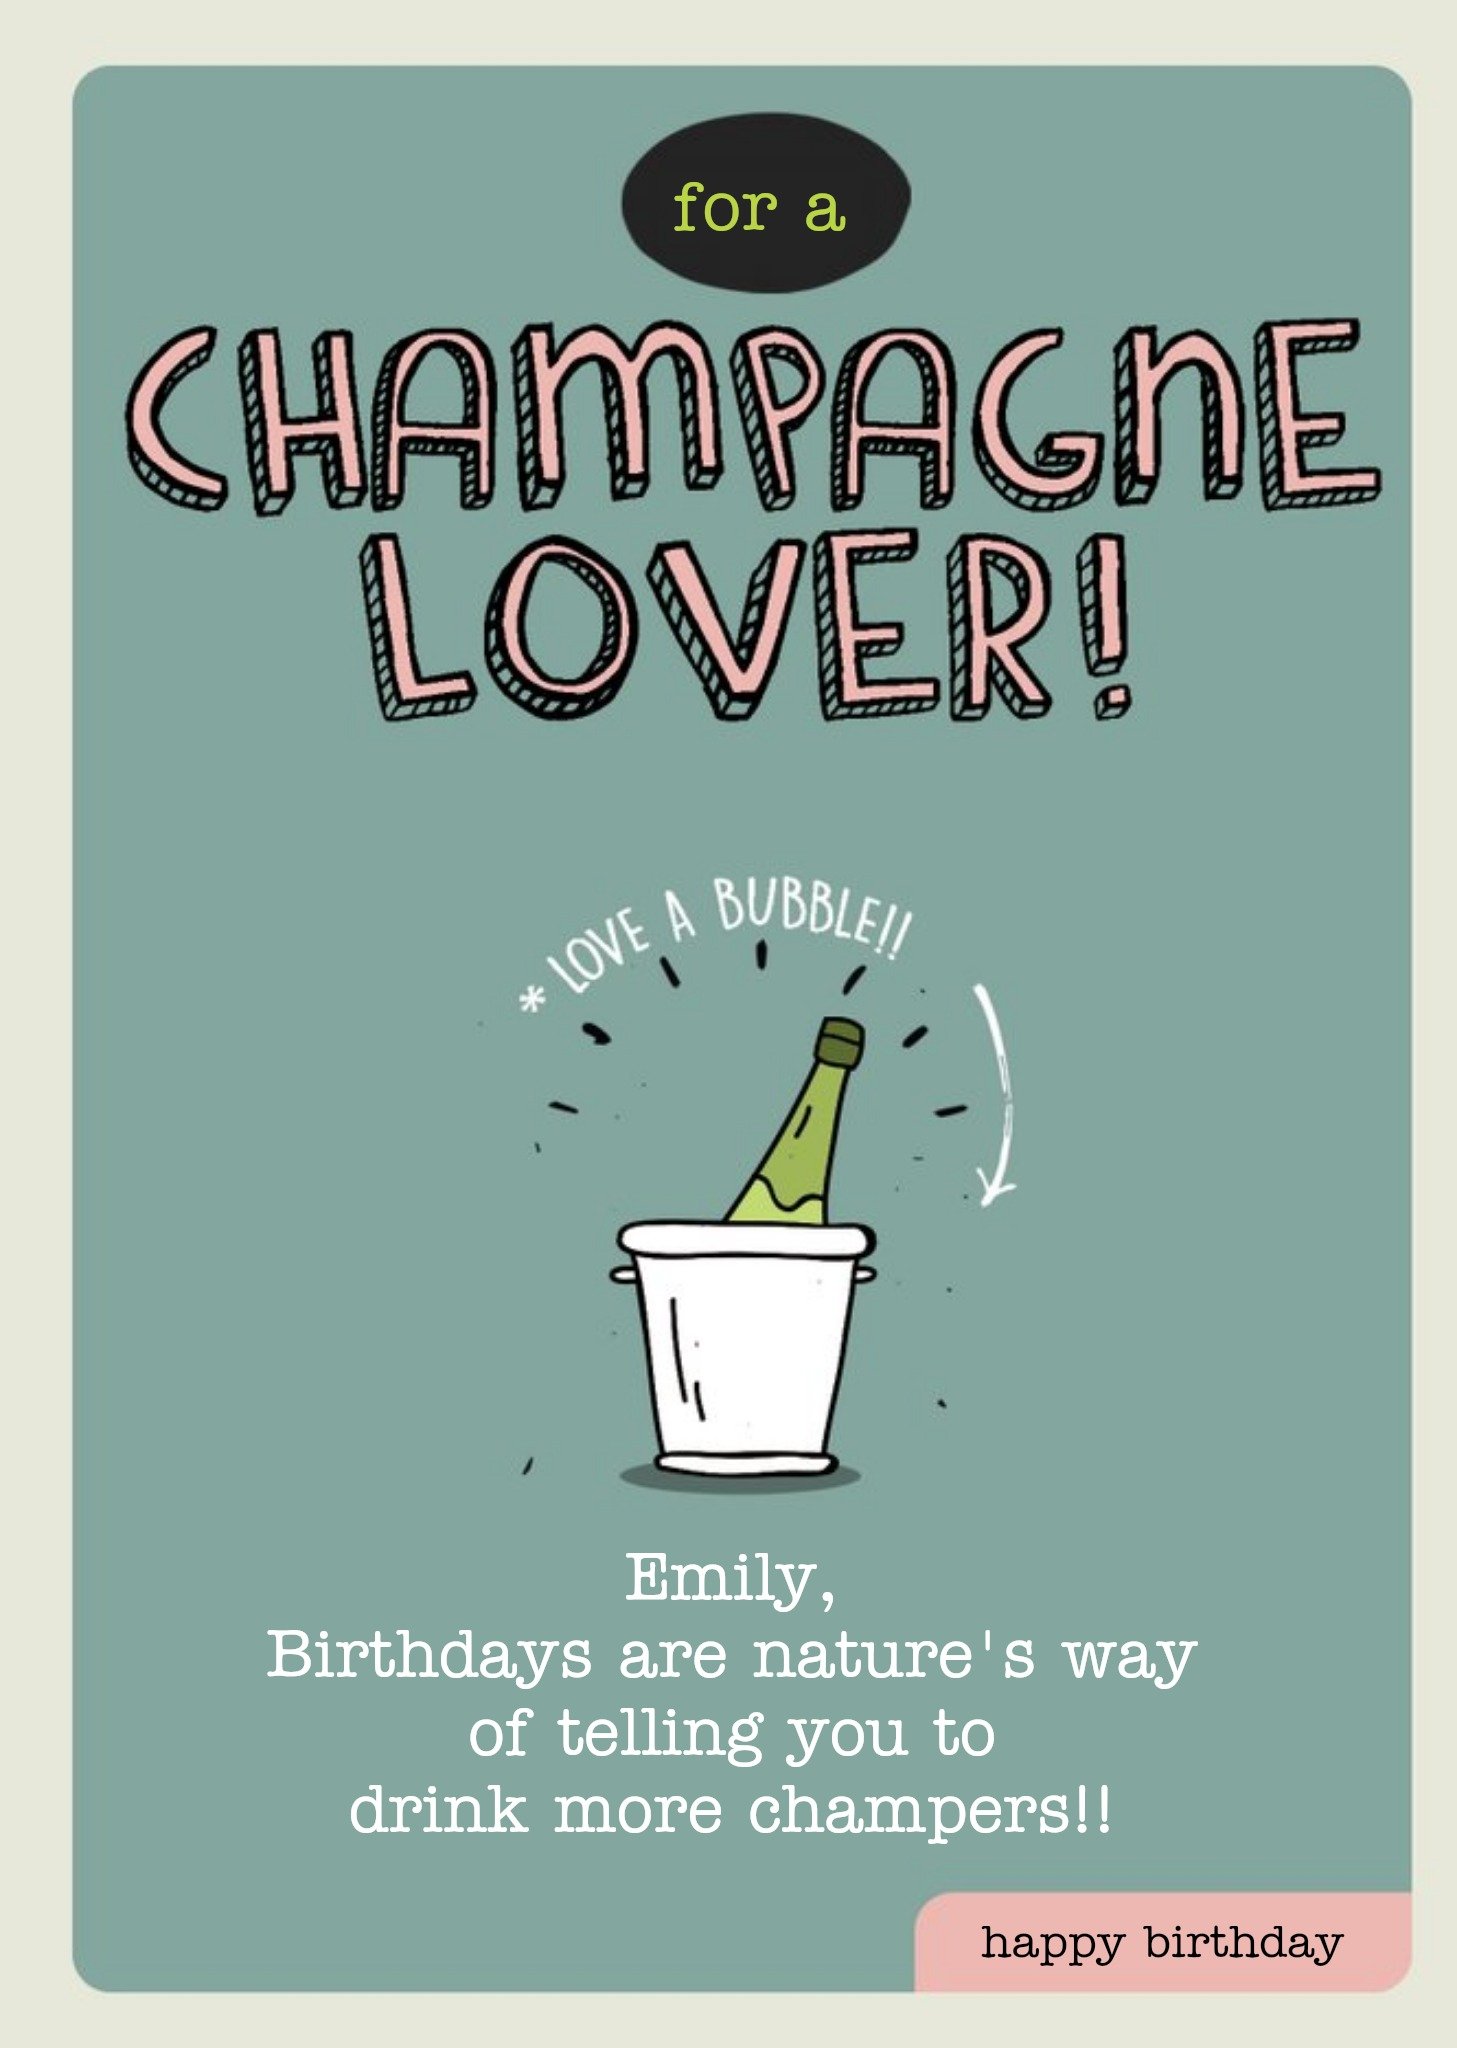 Moonpig For A Champagne Lover Personalised Happy Birthday Card, Large